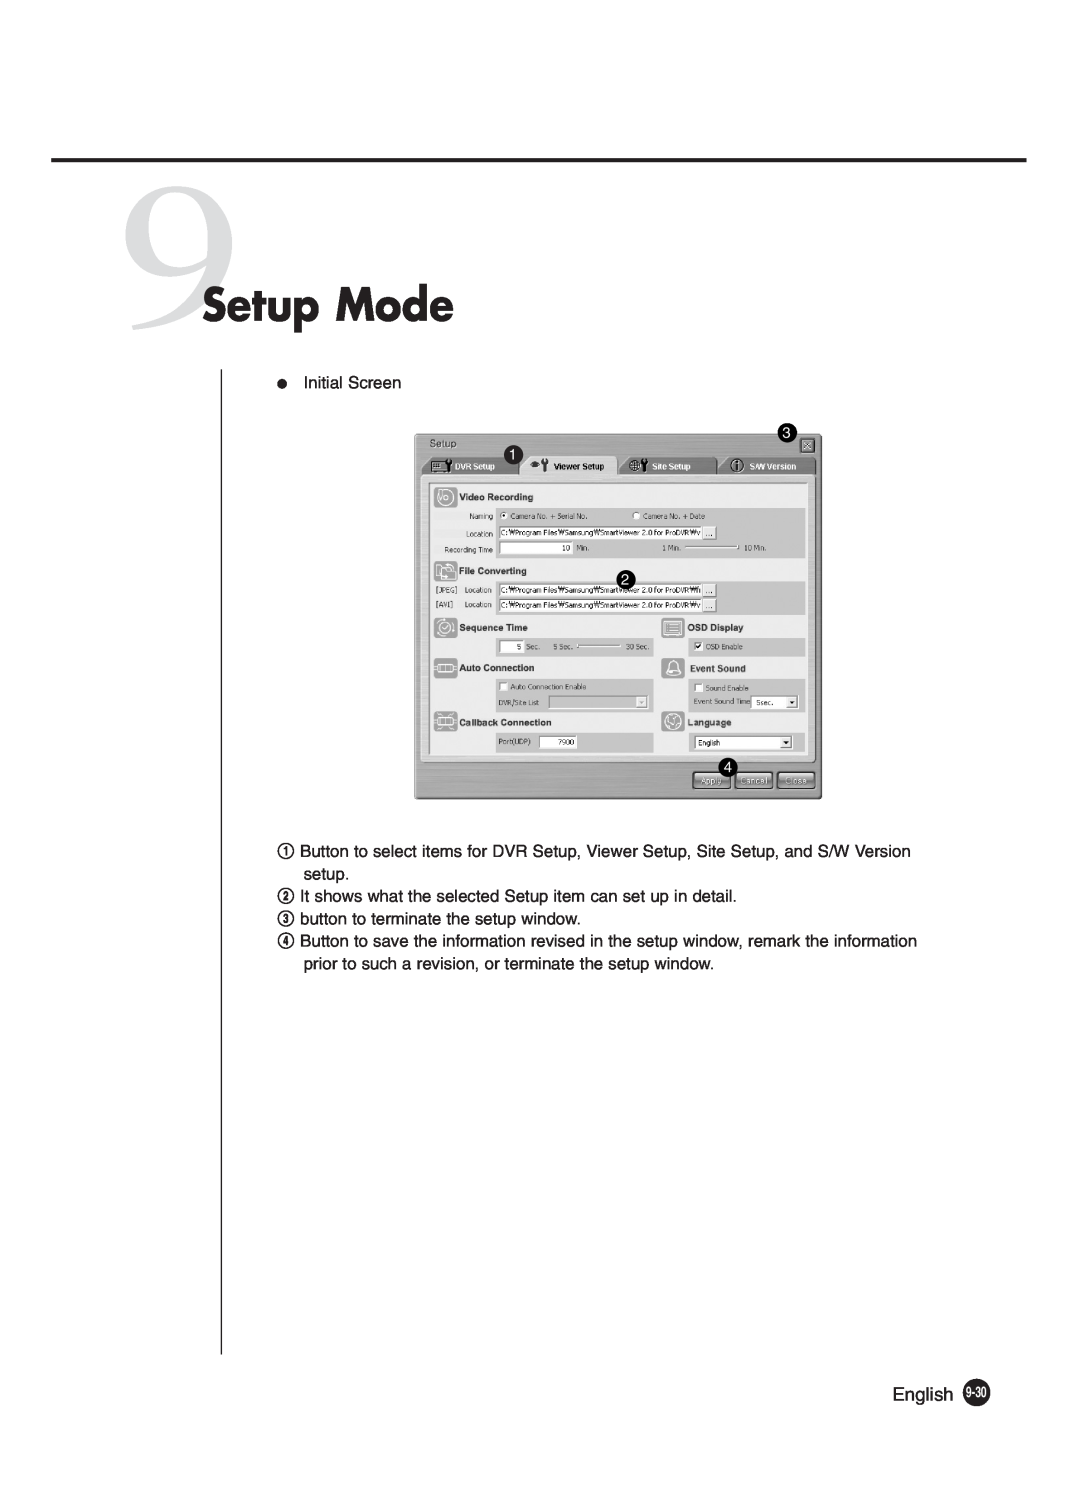 Samsung SHR-2042P250 manual 9Setup Mode, Initial Screen, @ It shows what the selected Setup item can set up in detail 